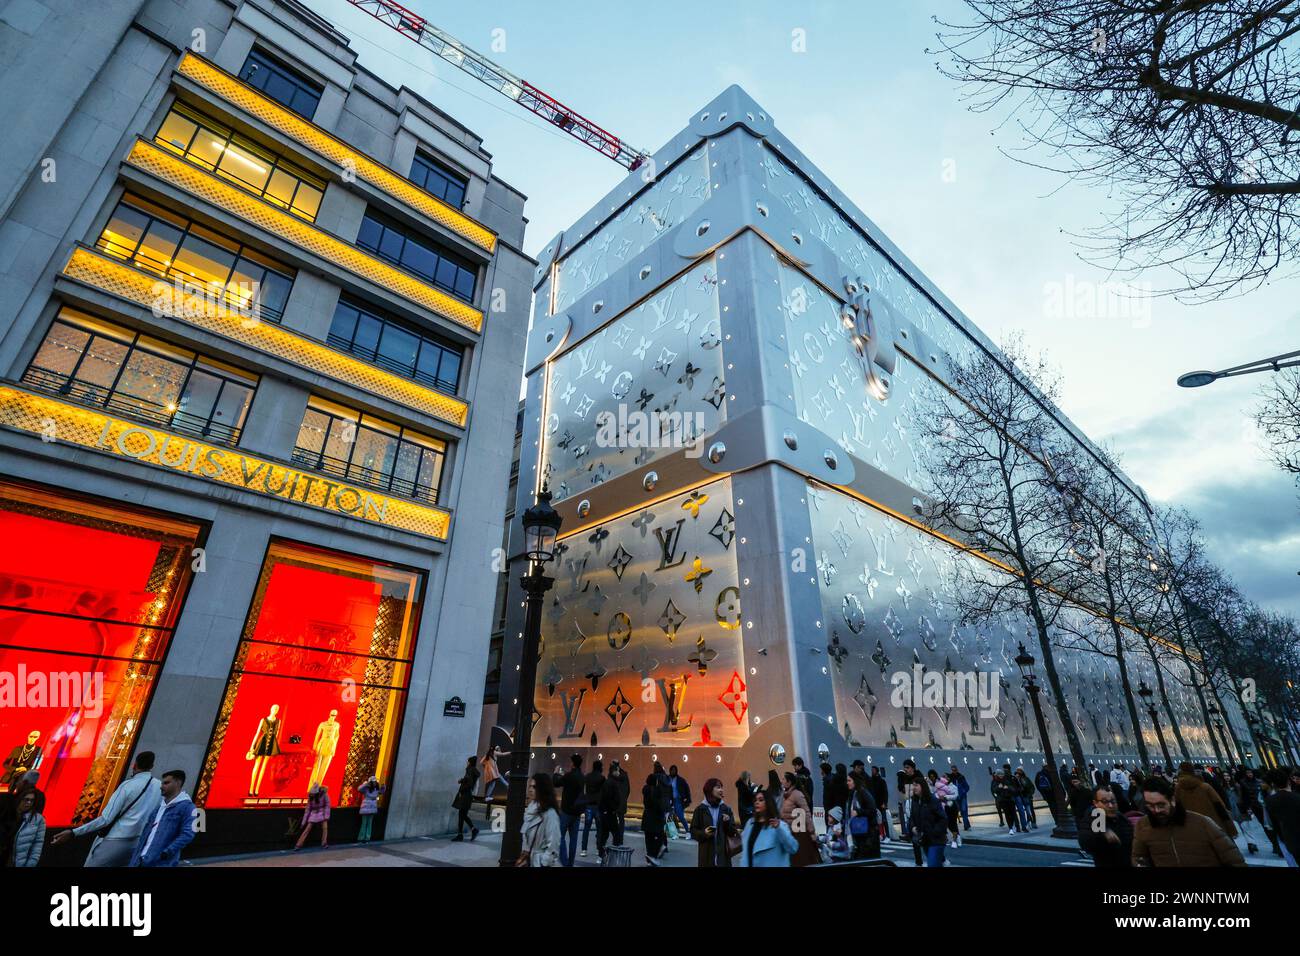 A MAMMOTH LOUIS VUITTON TRUNK ON THE CHAMPS ELYSEES PARIS Stock Photo